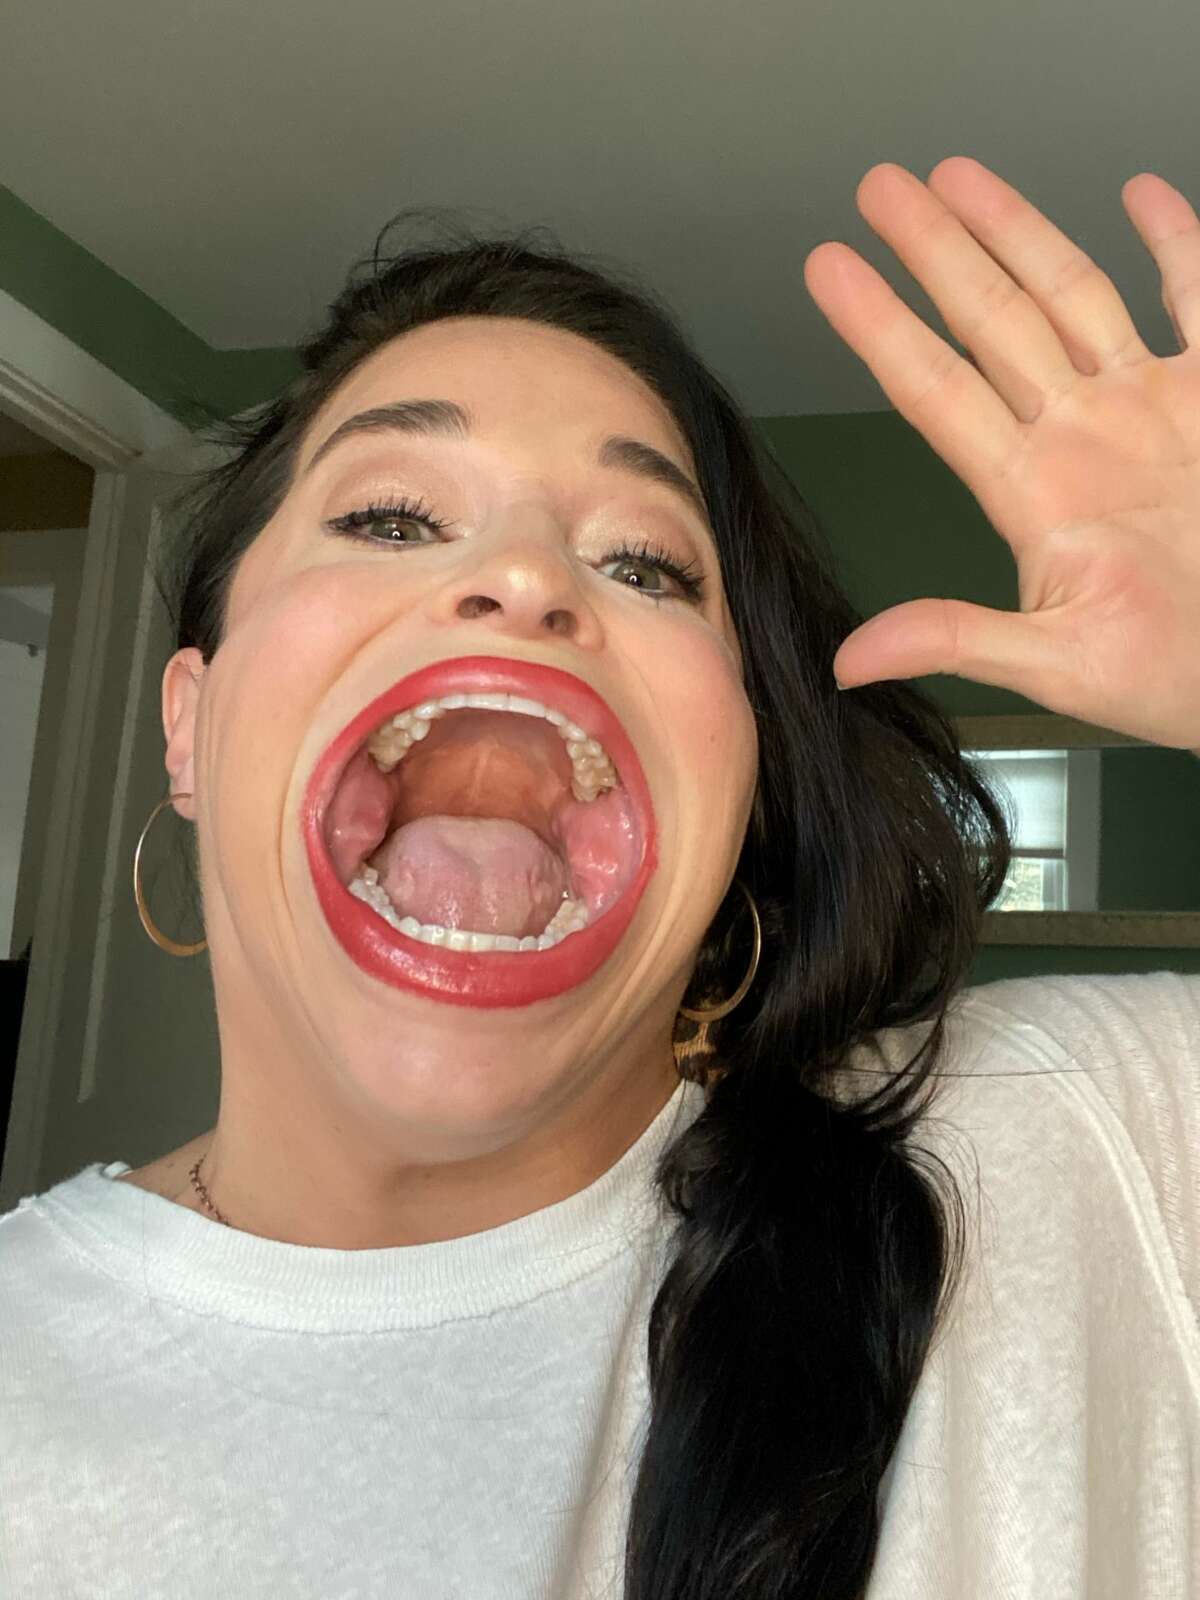 Stamford Woman Sets Guinness World Record For Largest Mouth Gape 9192